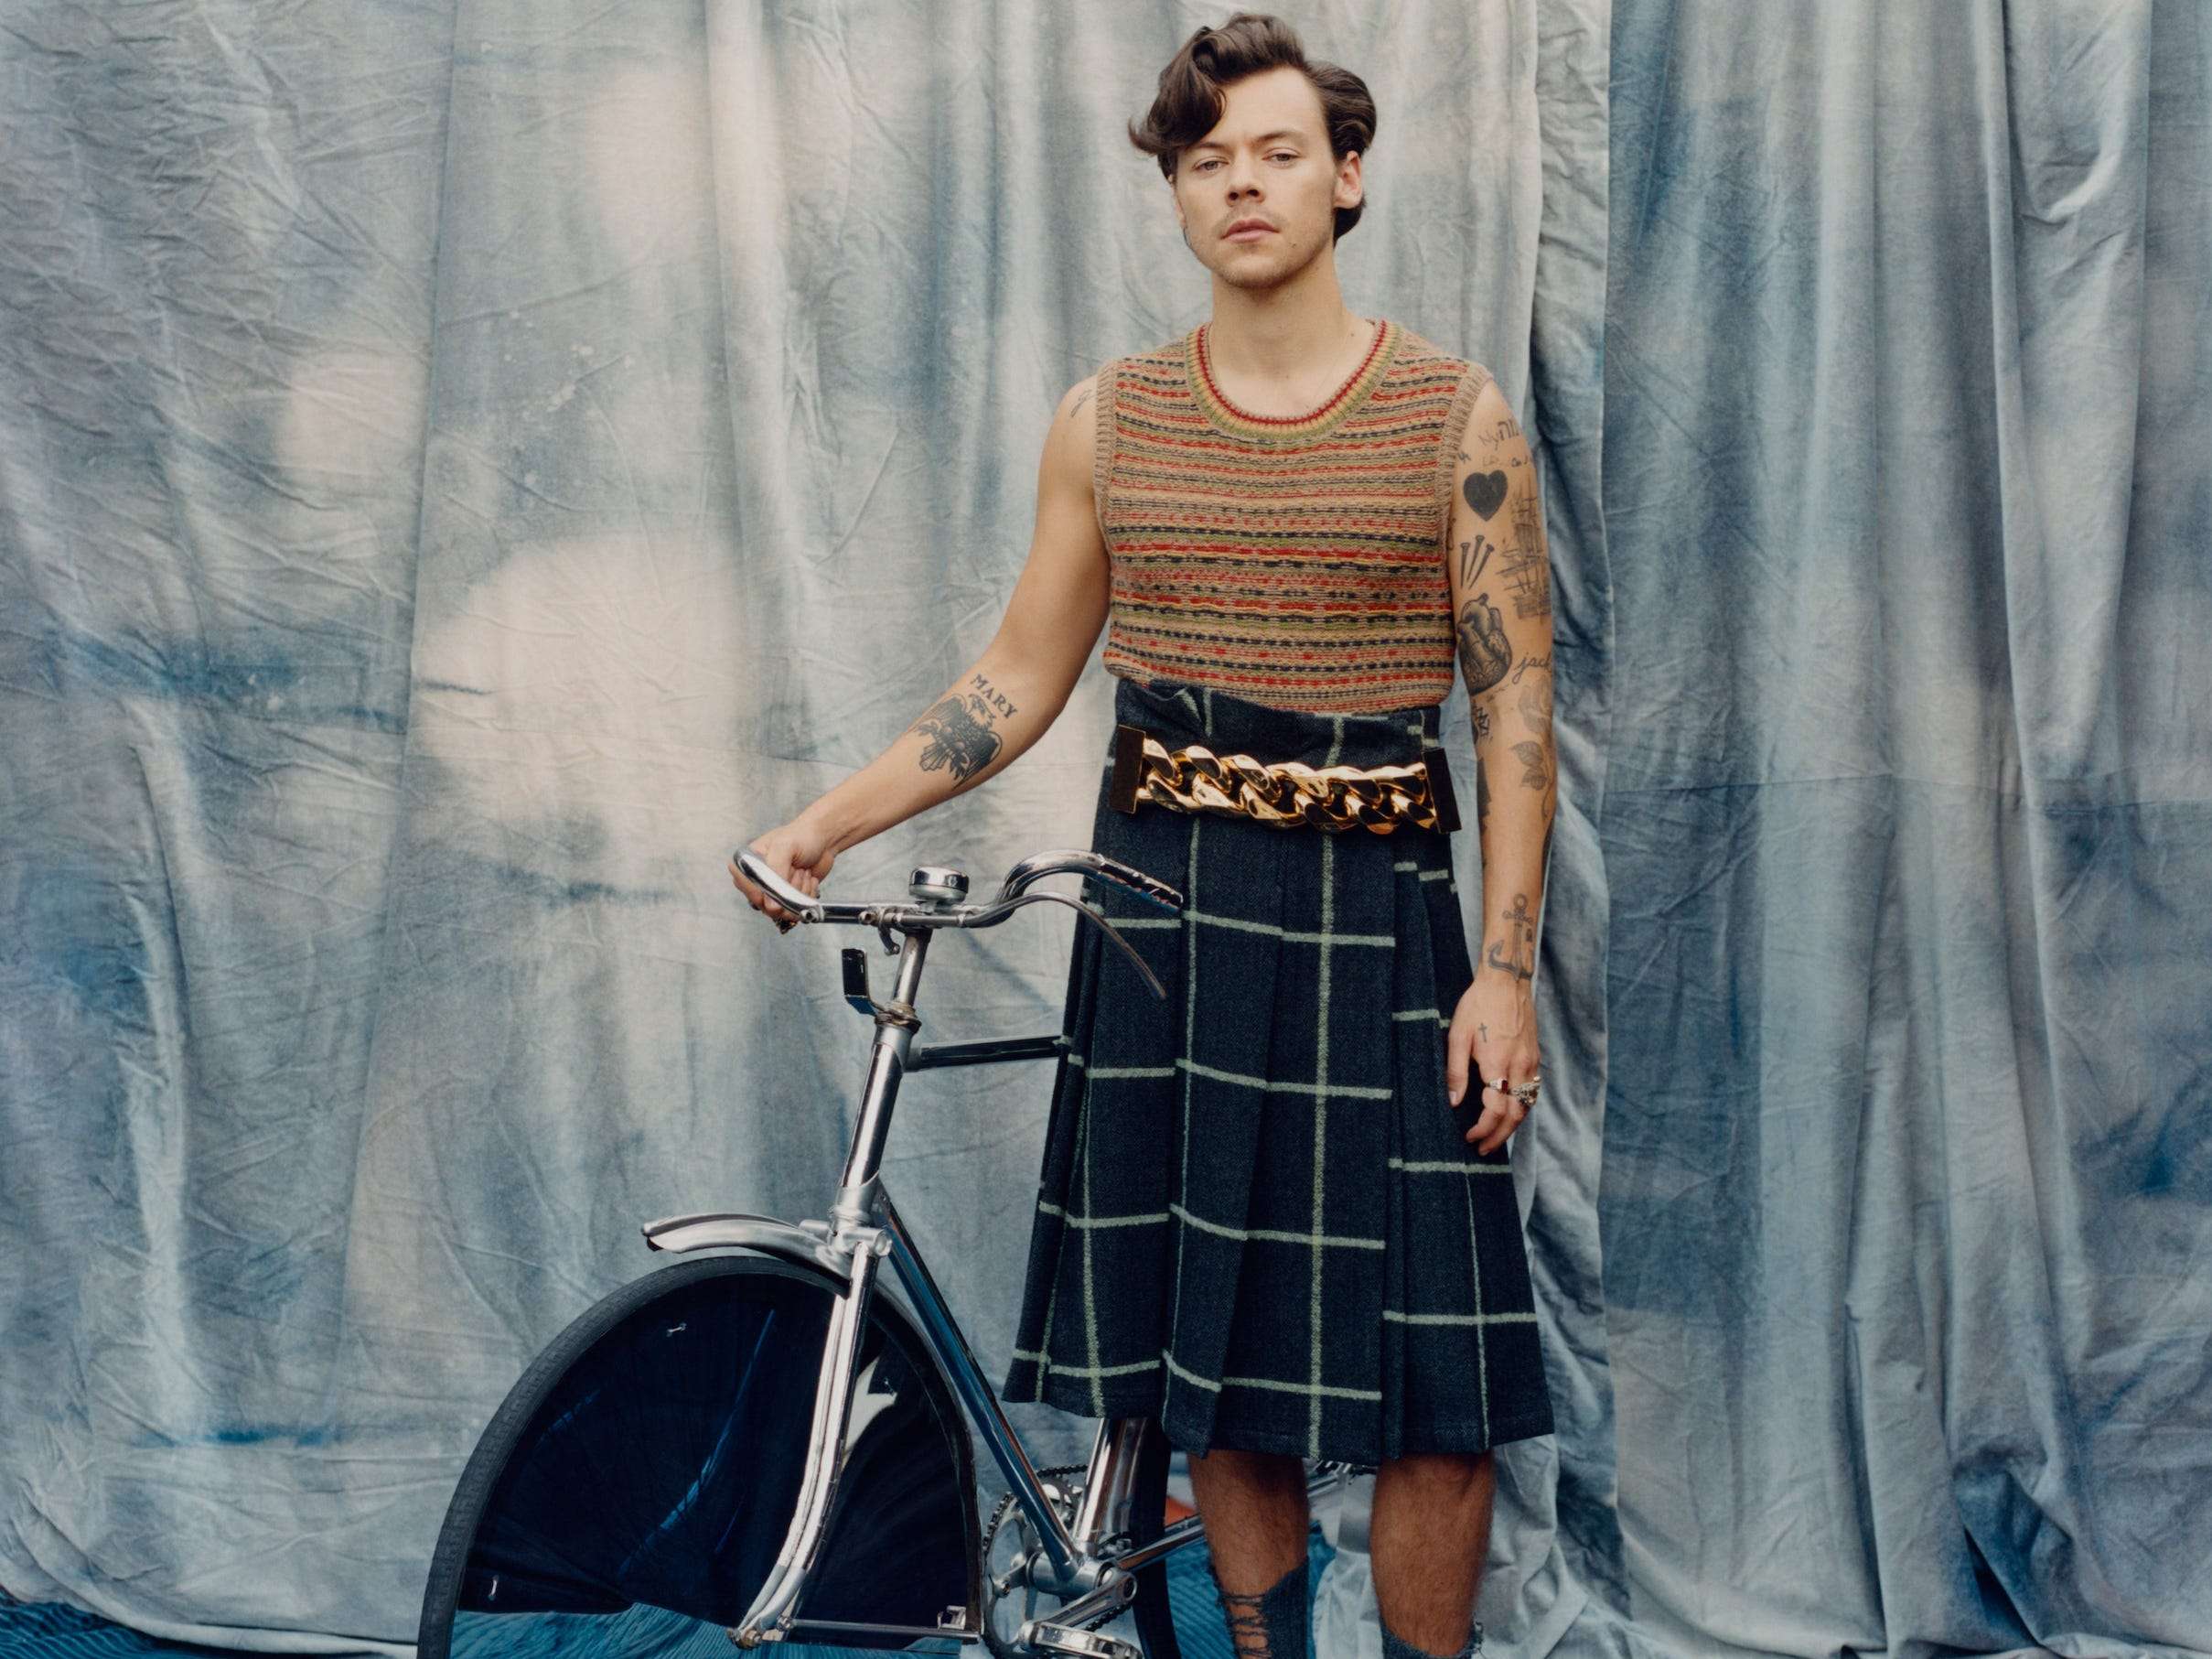  Harry  Styles  opens up about his fluid sense  of style  and 